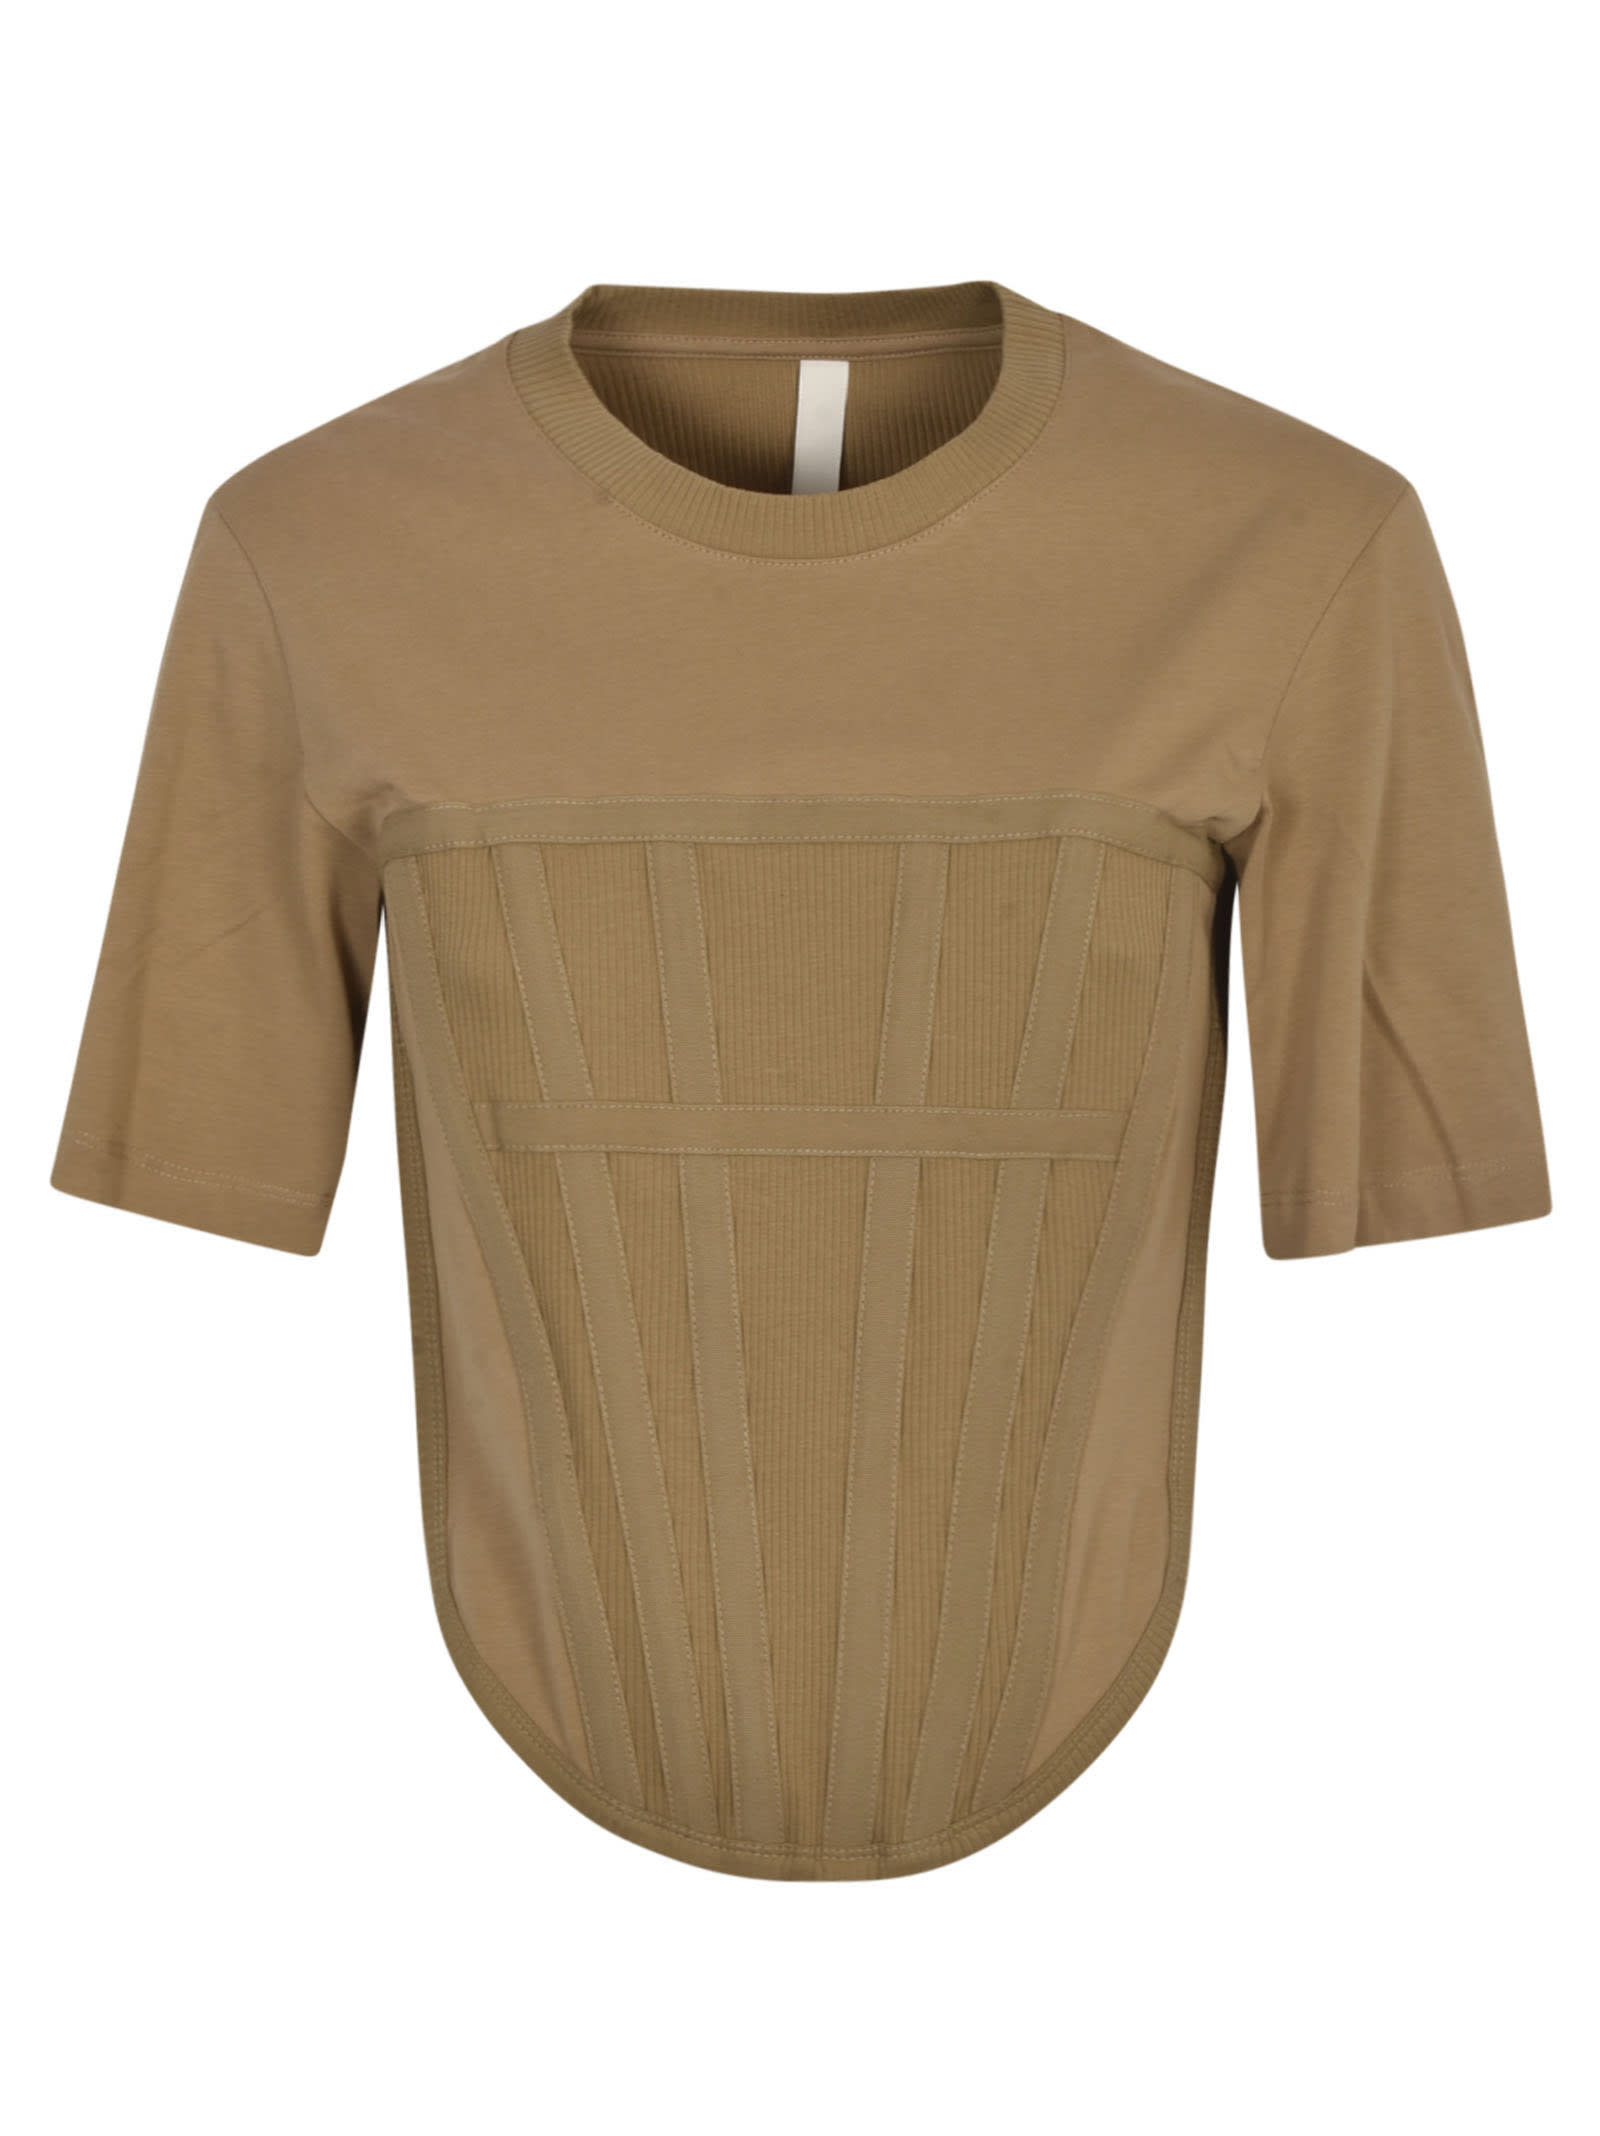 DION LEE SUSTAINABLE JERSEY CORSET T-SHIRT